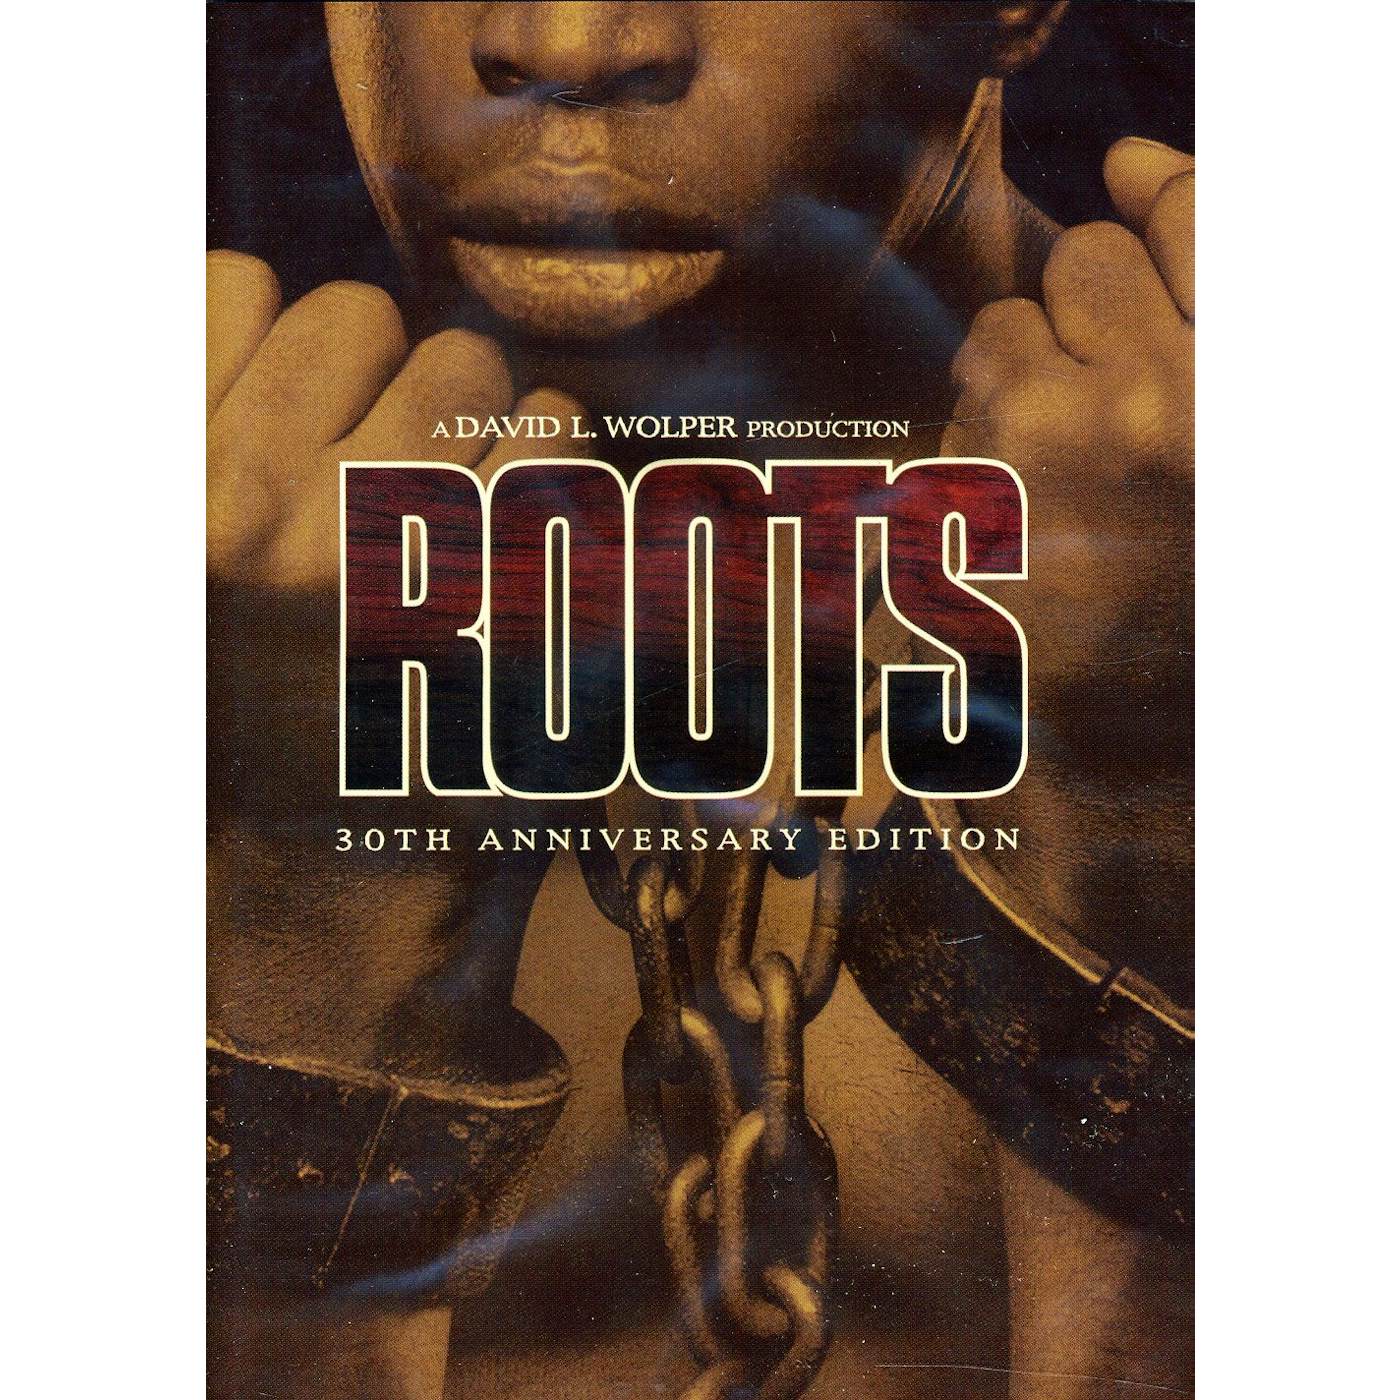 The Roots DVD